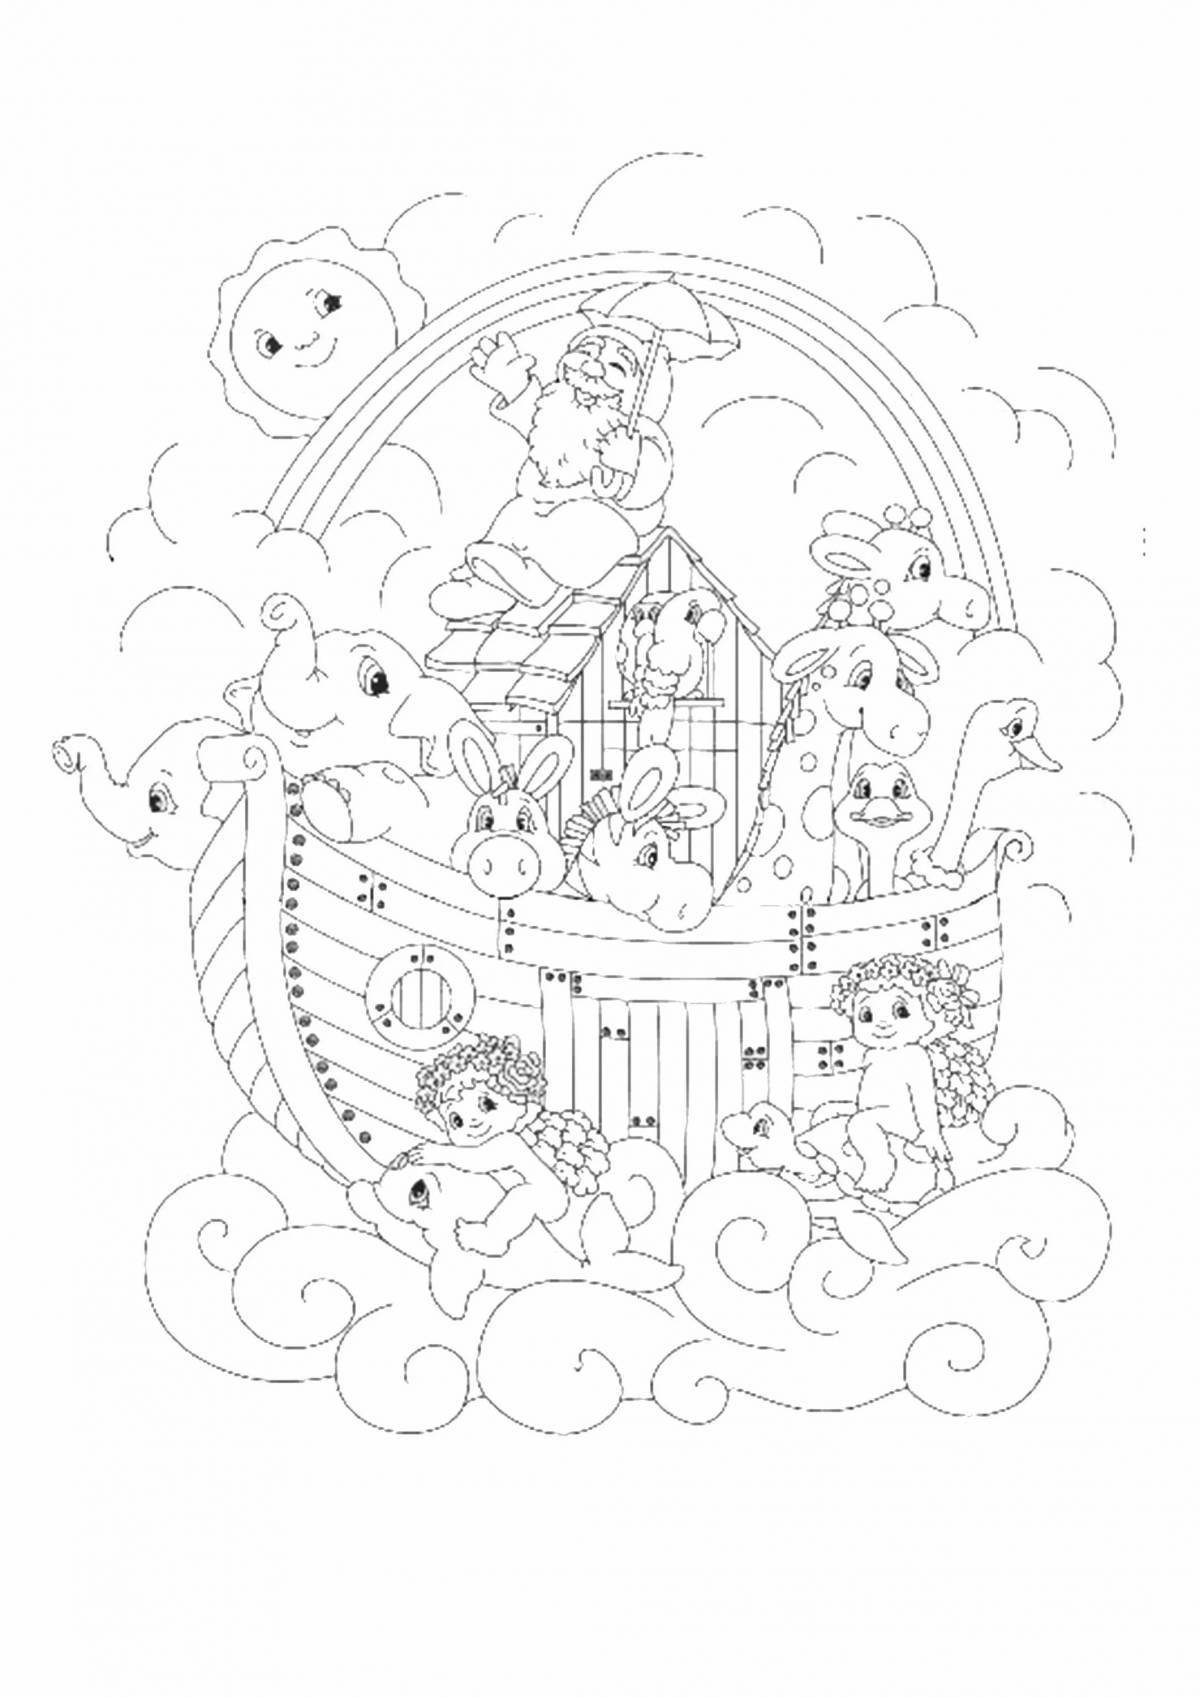 Amazing Noah's Ark coloring book for kids